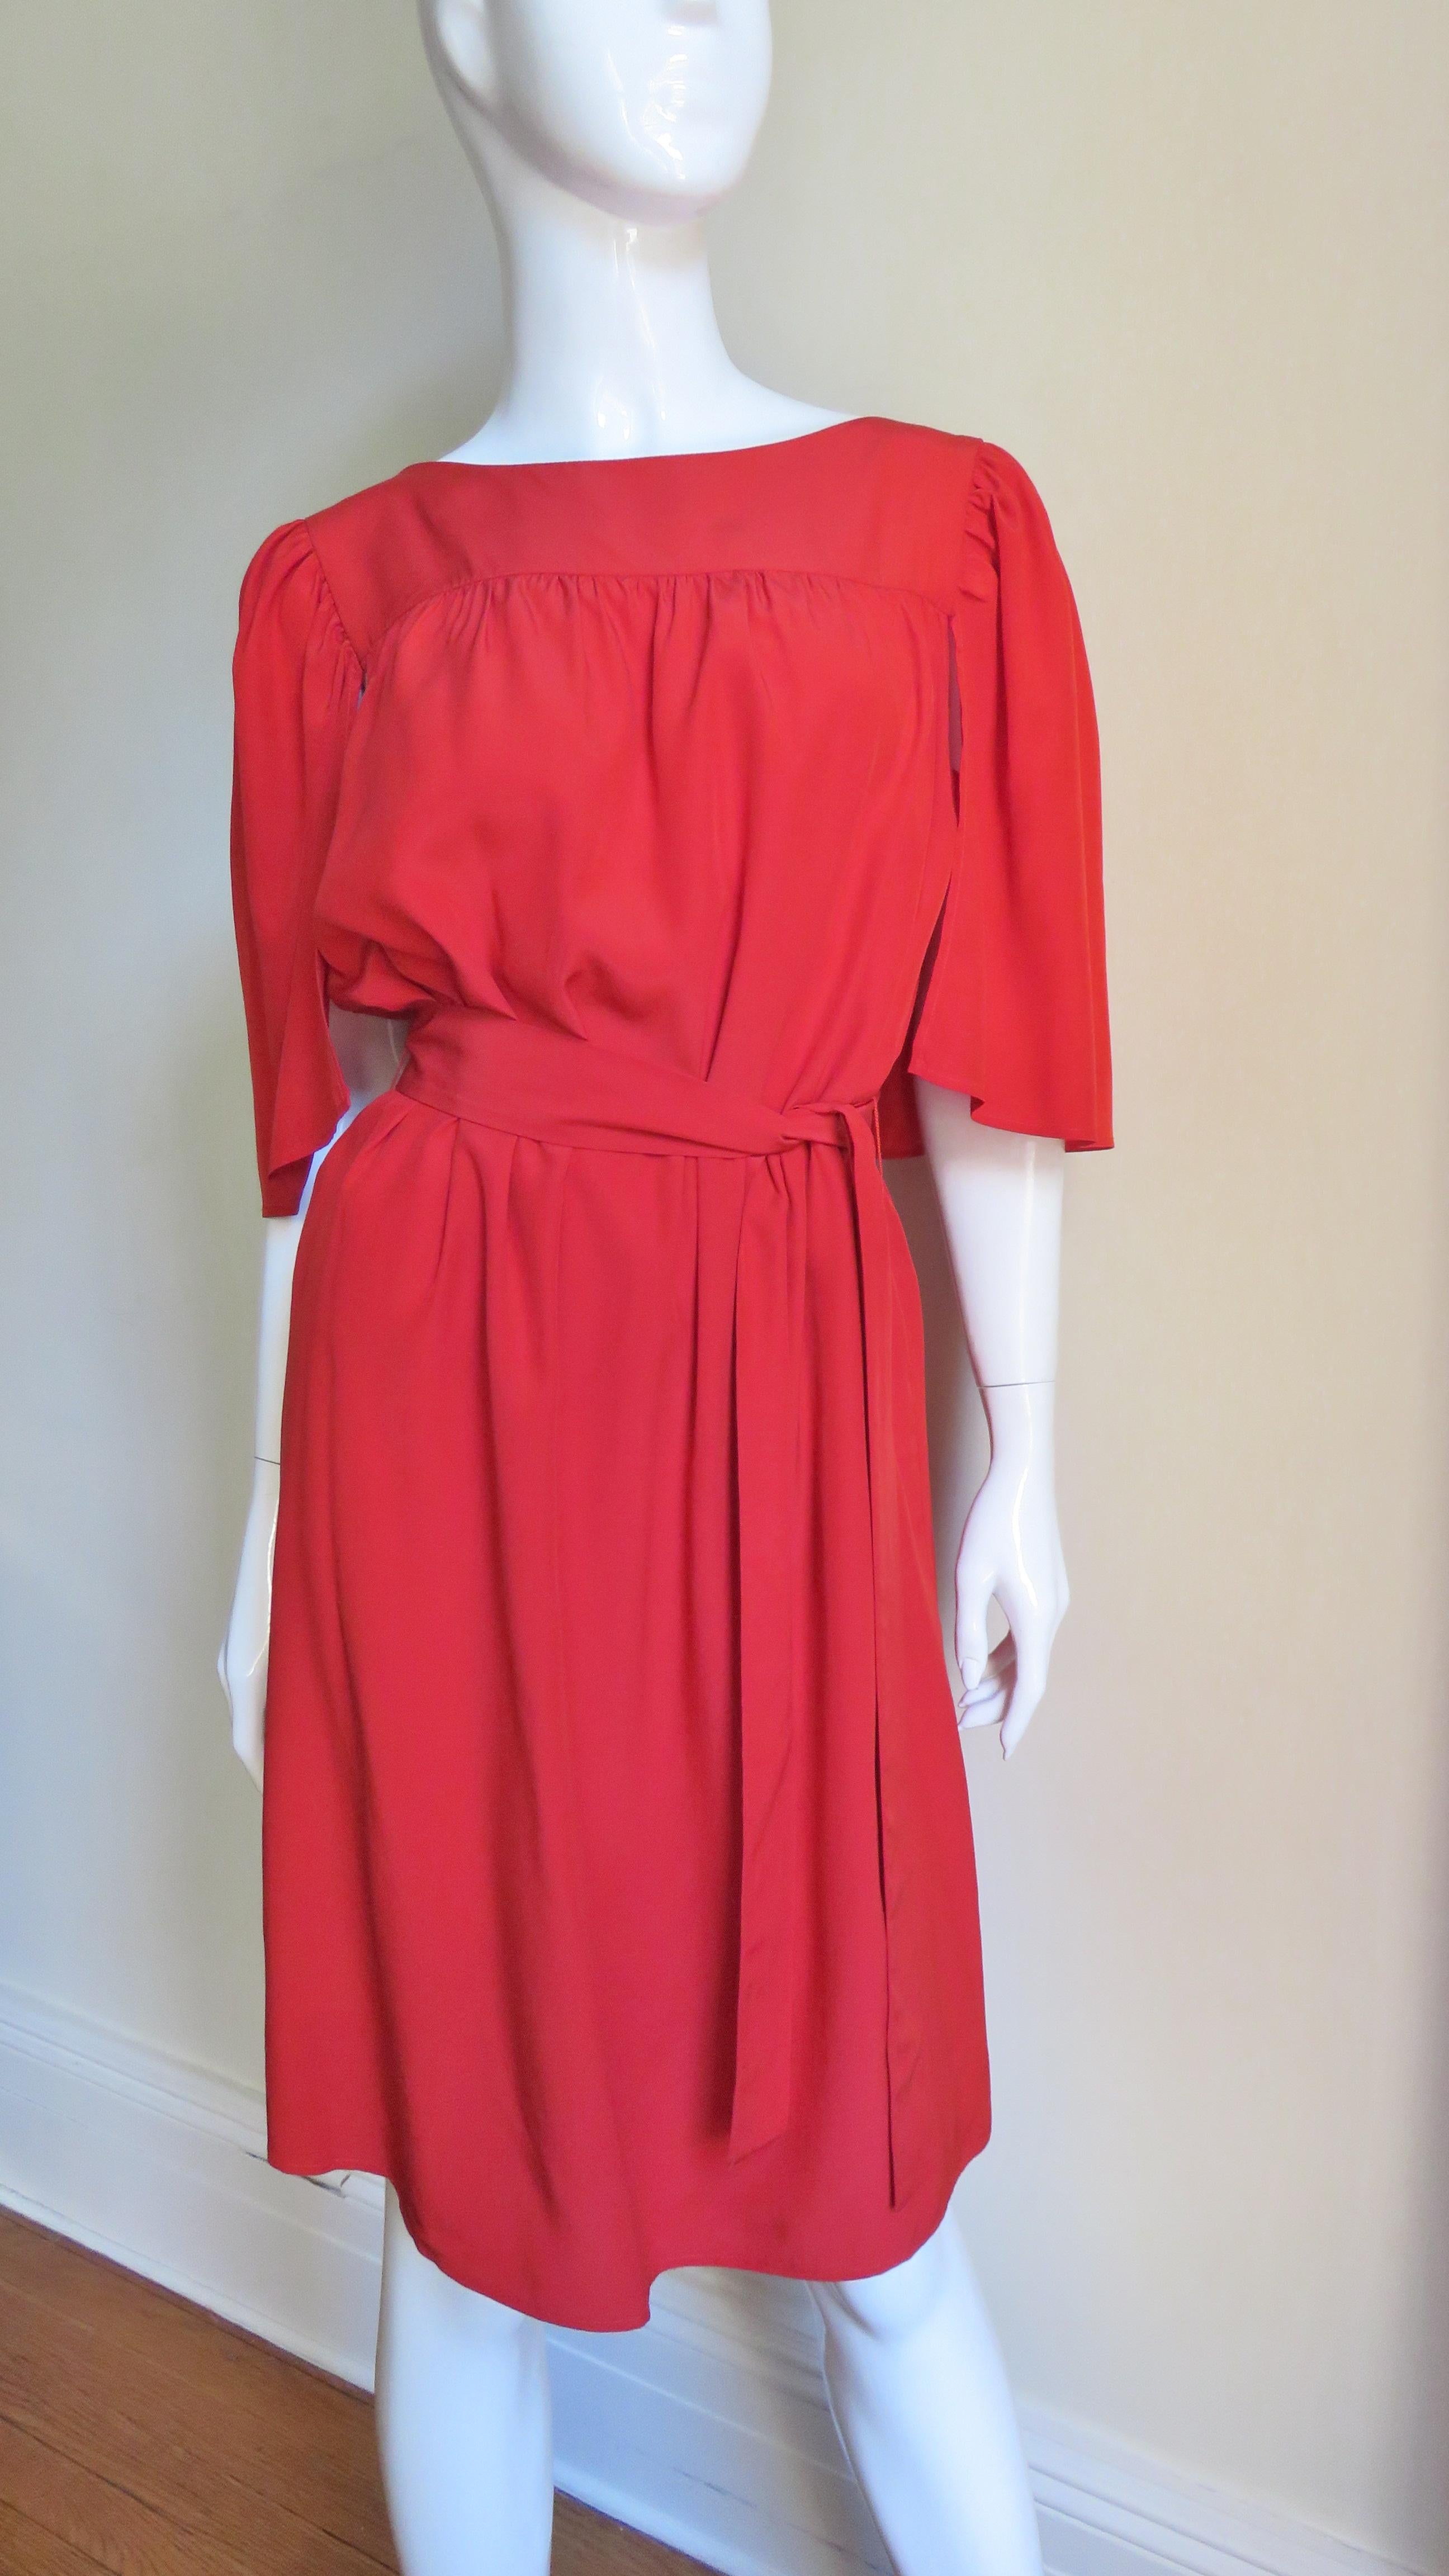 A fabulous red silk dress from Yves St Laurent, YSL 2011 Resort Collection.  It has a bateau neckline with a yoke from which a fabulous caplet falls around the arms and at the back.  It comes with a matching tie belt and is lined in matching silk. 